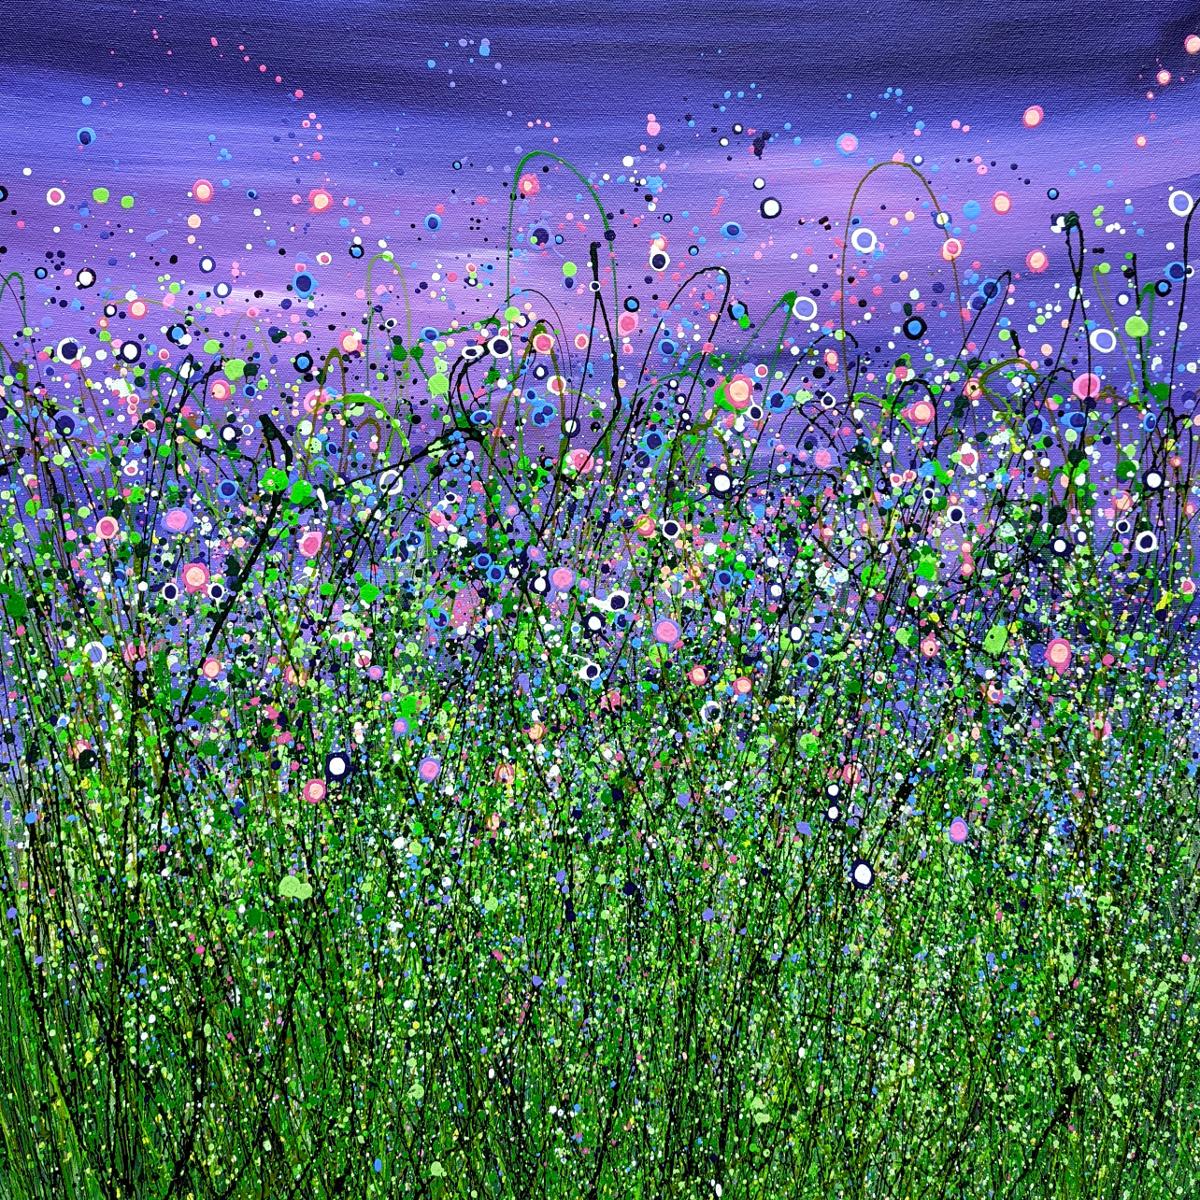 Lucy Moore  Landscape Painting - Amethyst Rhapsody by Lucy Moore, Abstract versus Figurative, Floral art 